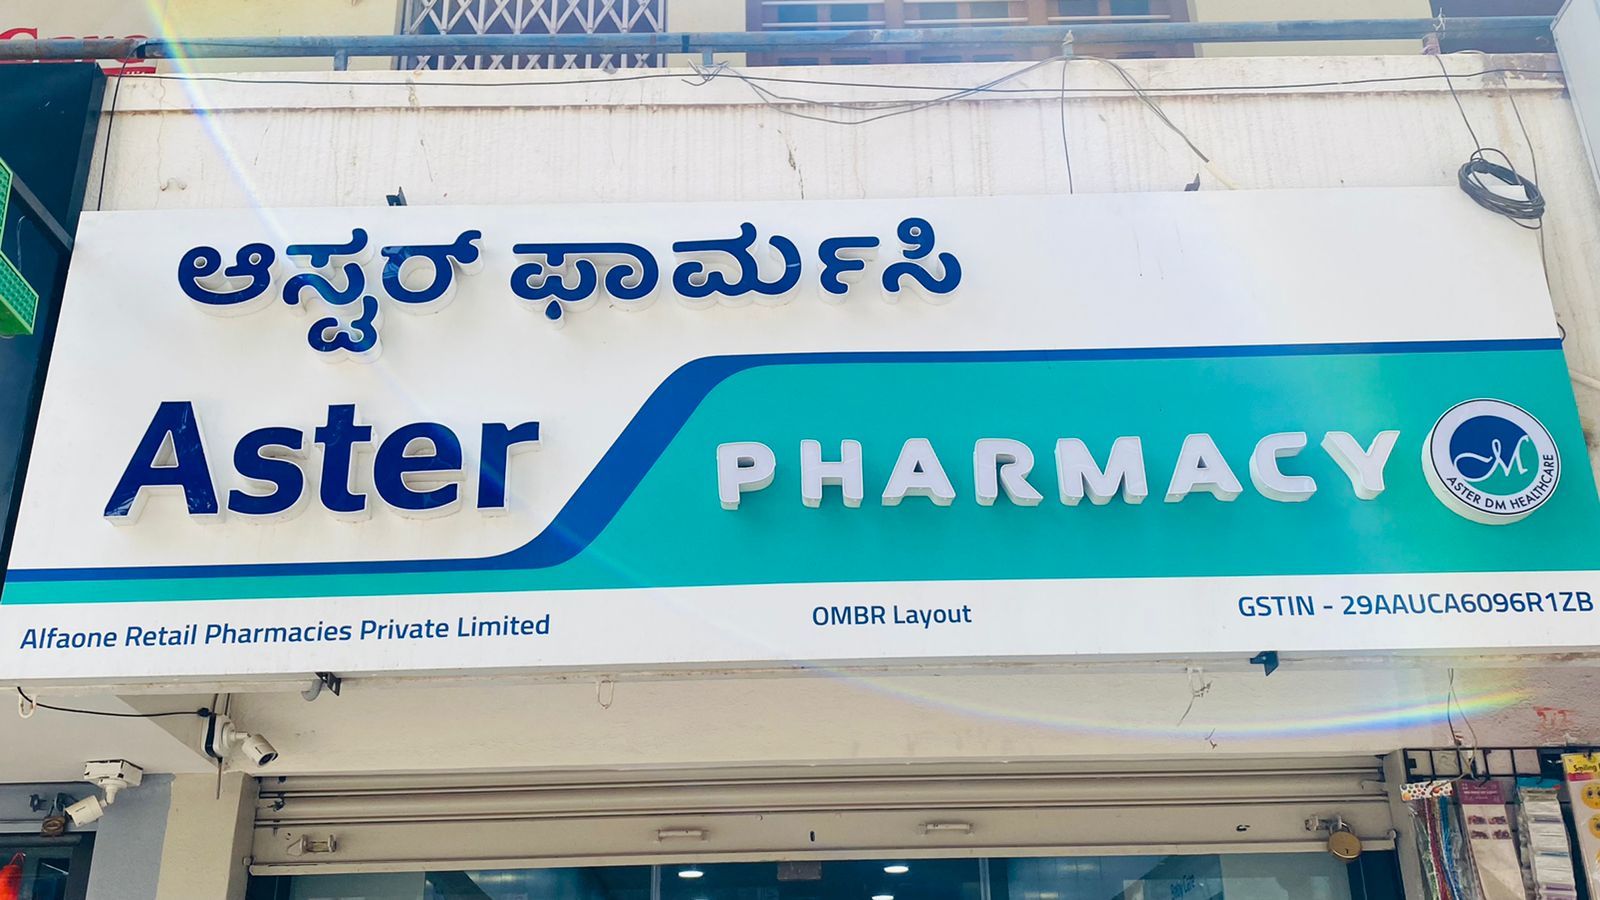 Aster Pharmacy in OMBR Layout, Bangalore